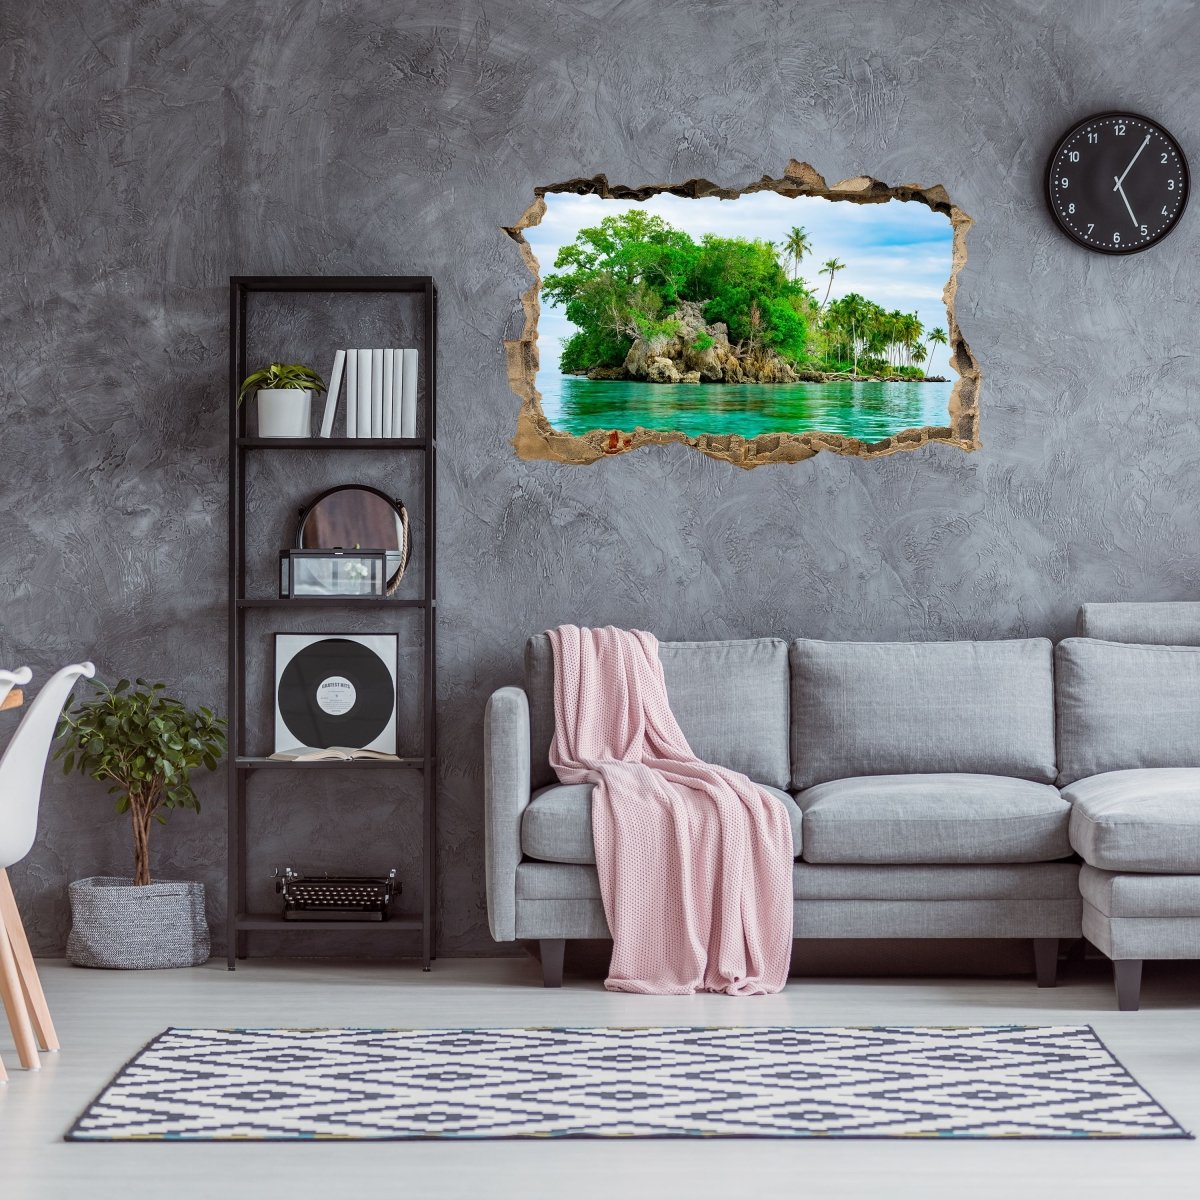 3D wall sticker lonely island, palm trees, rocks, sea - wall decal M1222